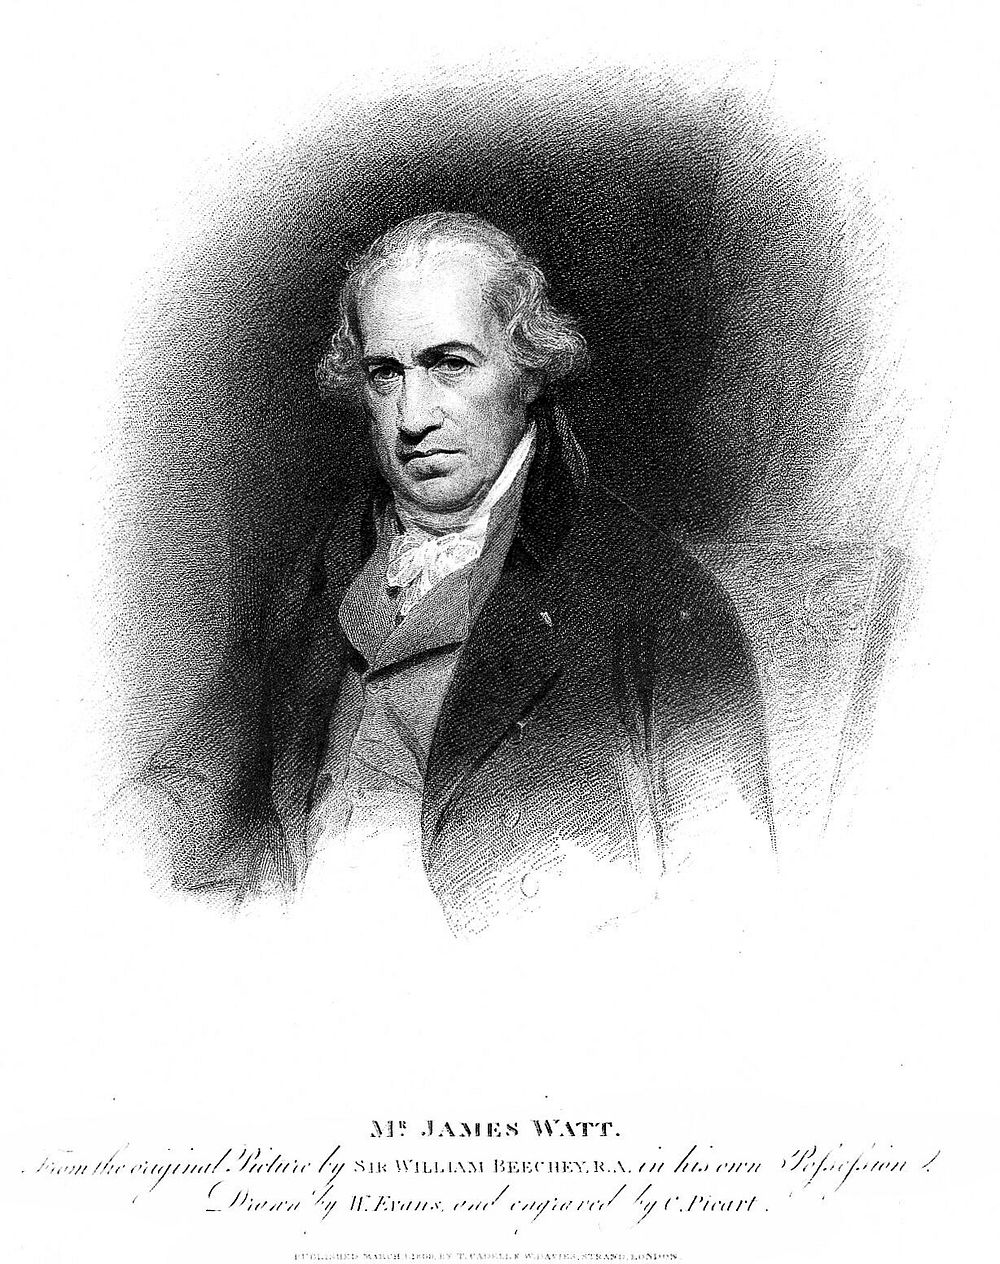 James Watt. Stipple engraving by C. Picart, 1809, after W. Evans after Sir W. Beechey.